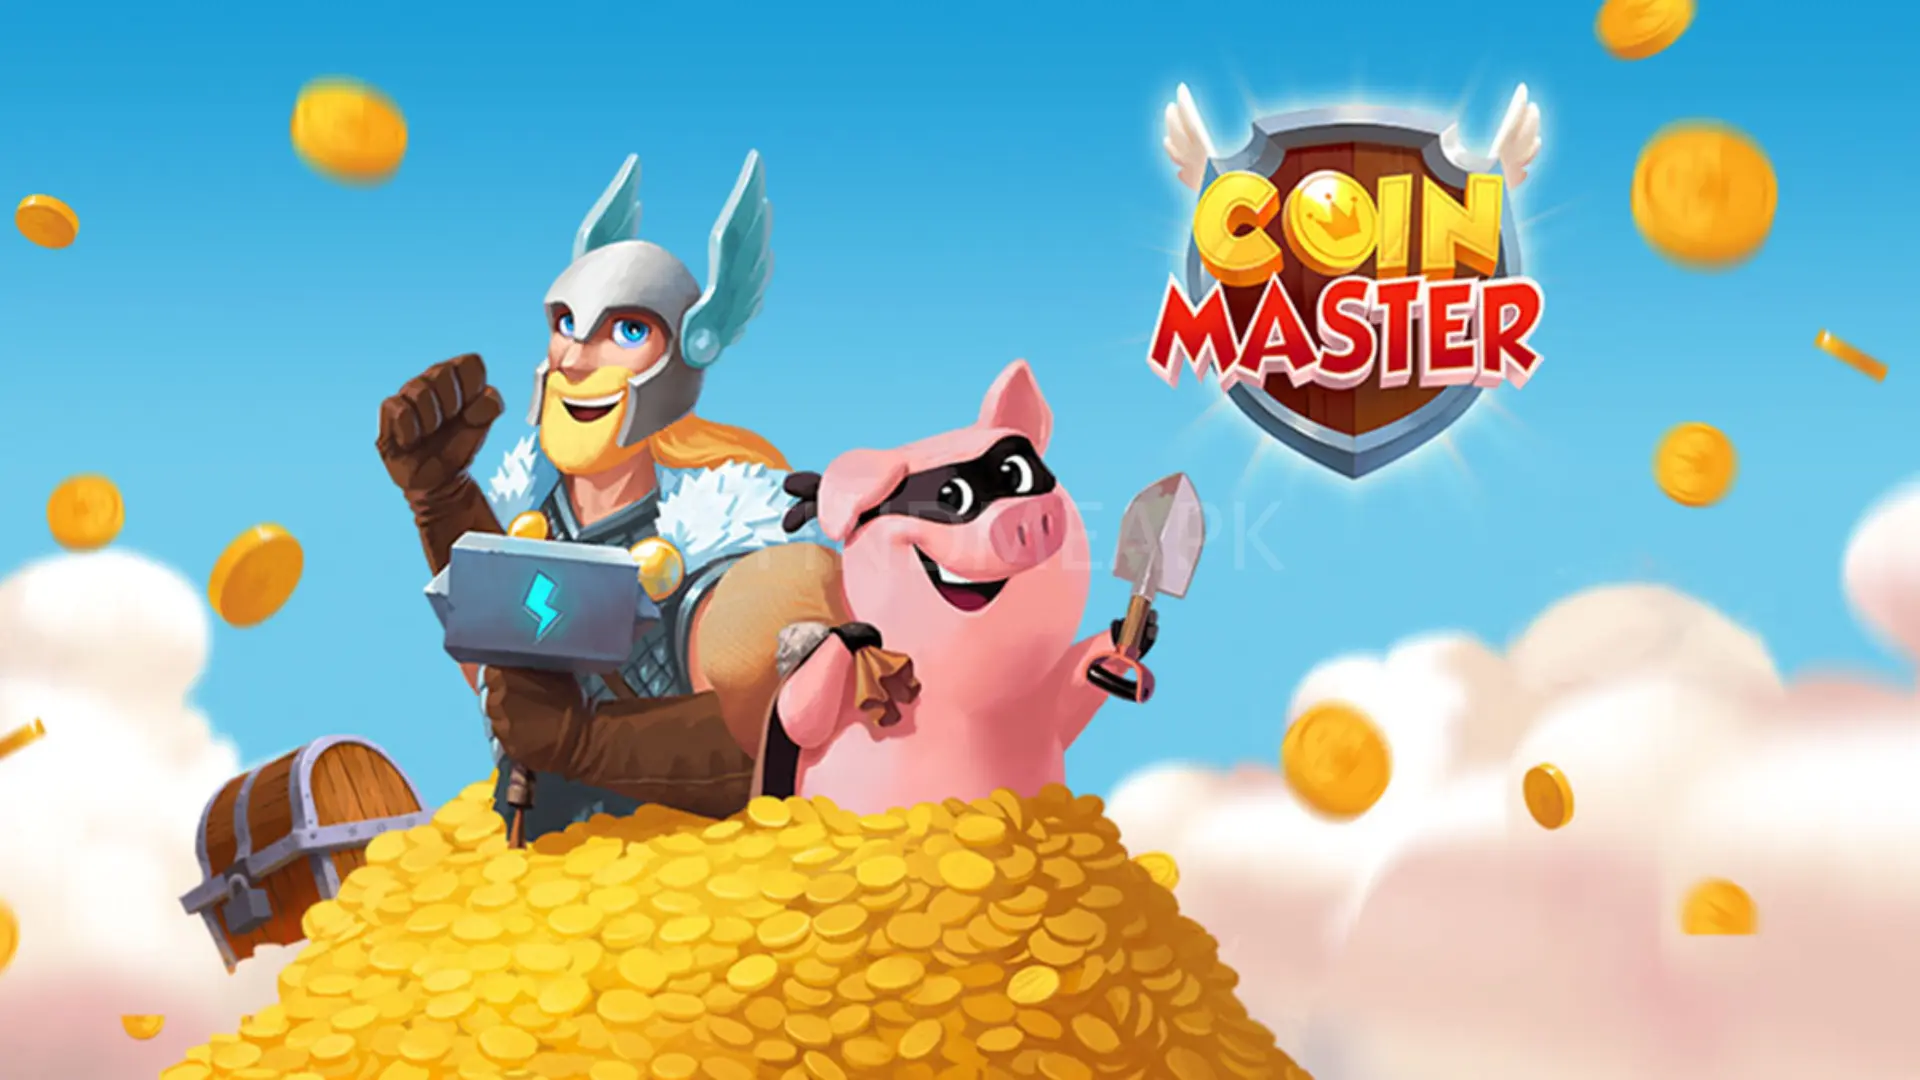 Coin Master APK (Unlimited Coins/Spins)